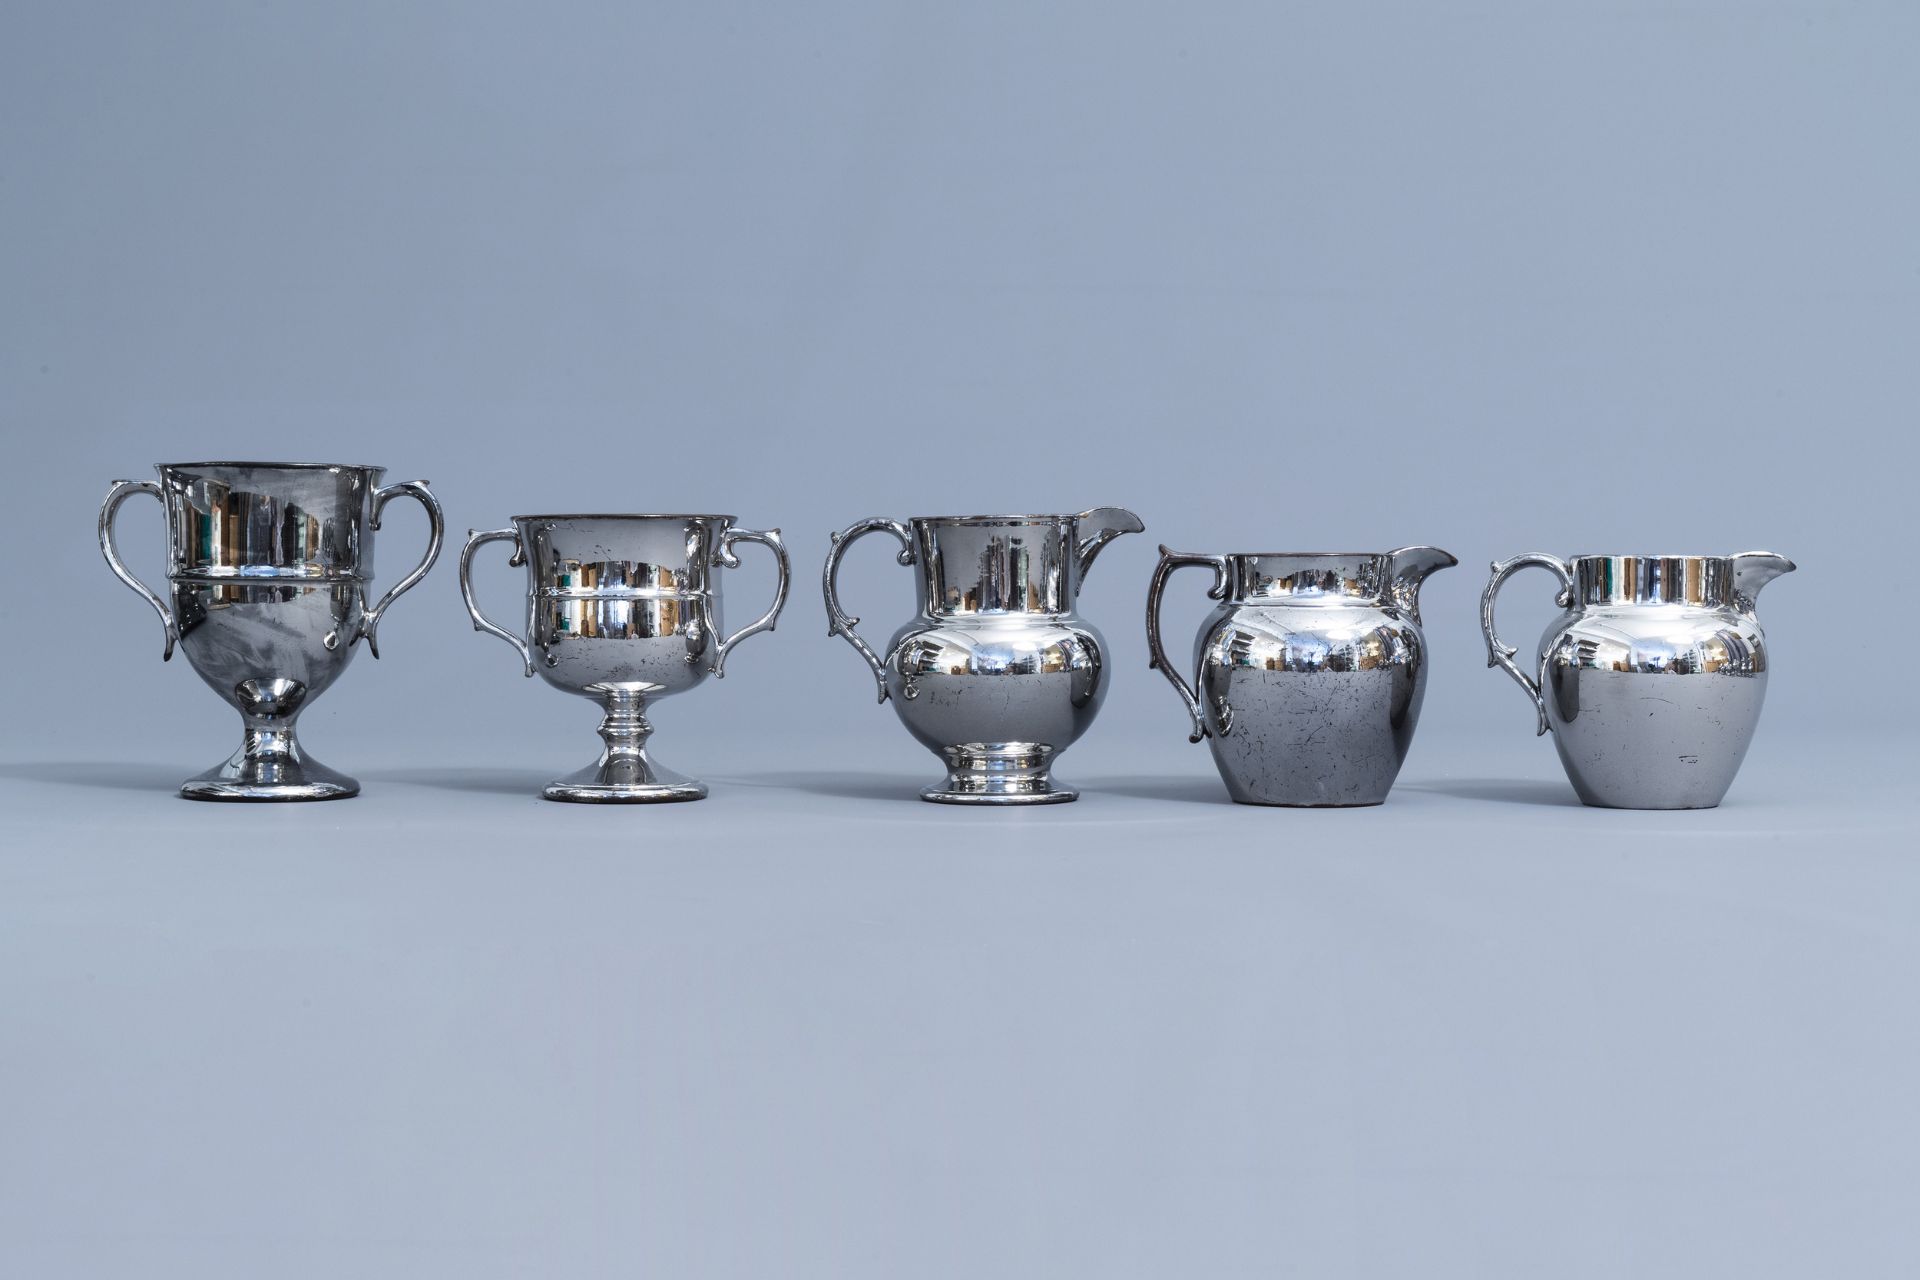 A varied collection of English silver lustreware items, 19th C. - Image 20 of 54